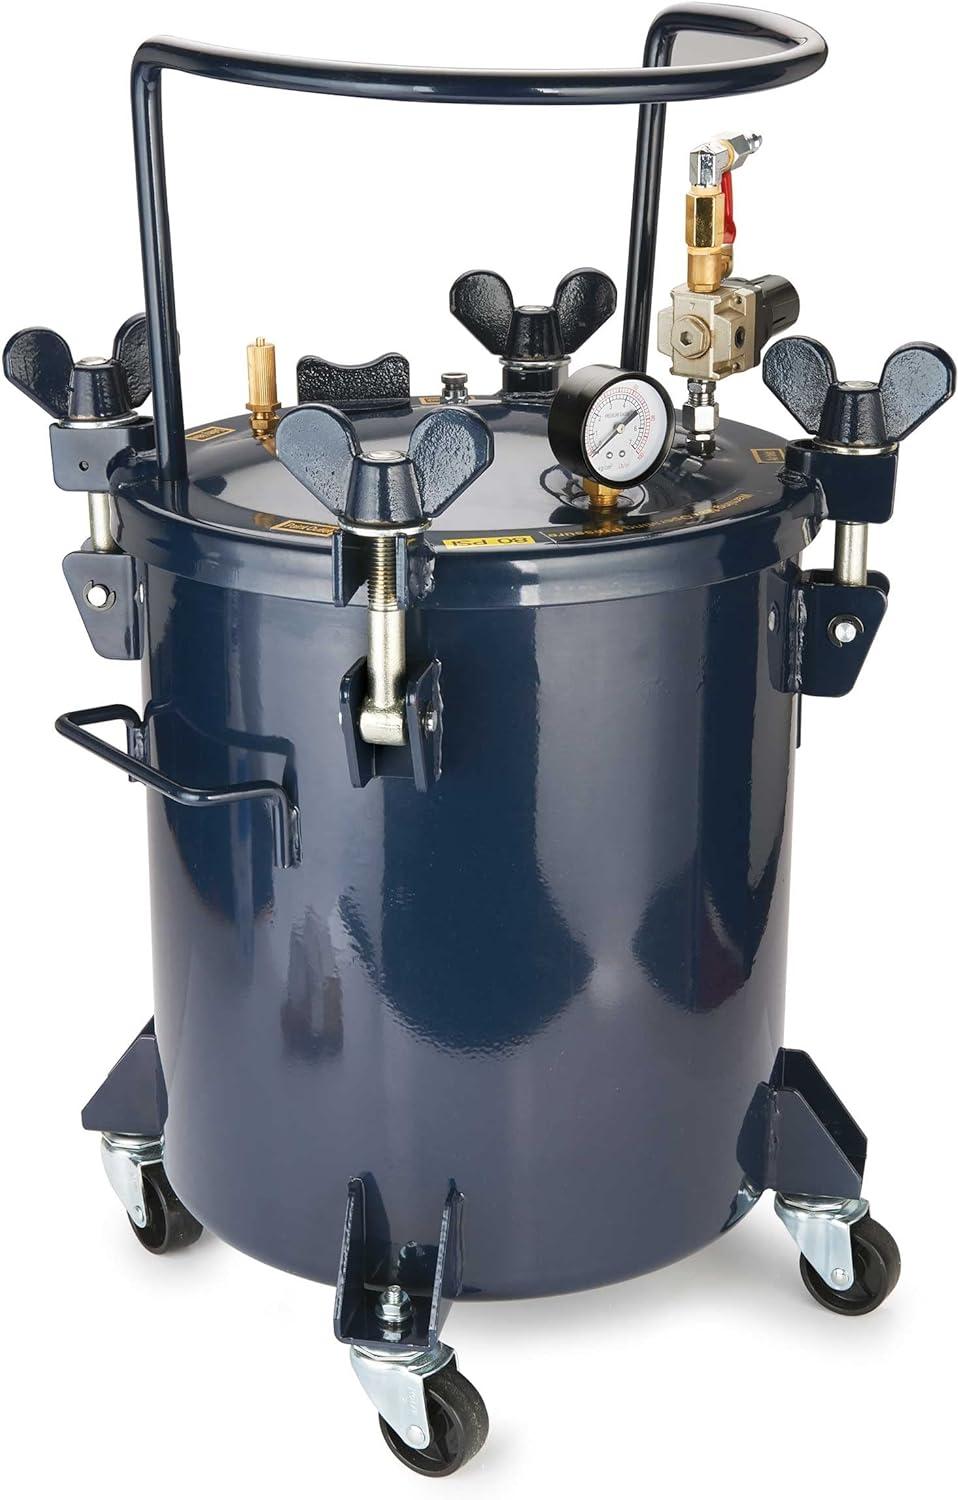 A large image of a pressure pot